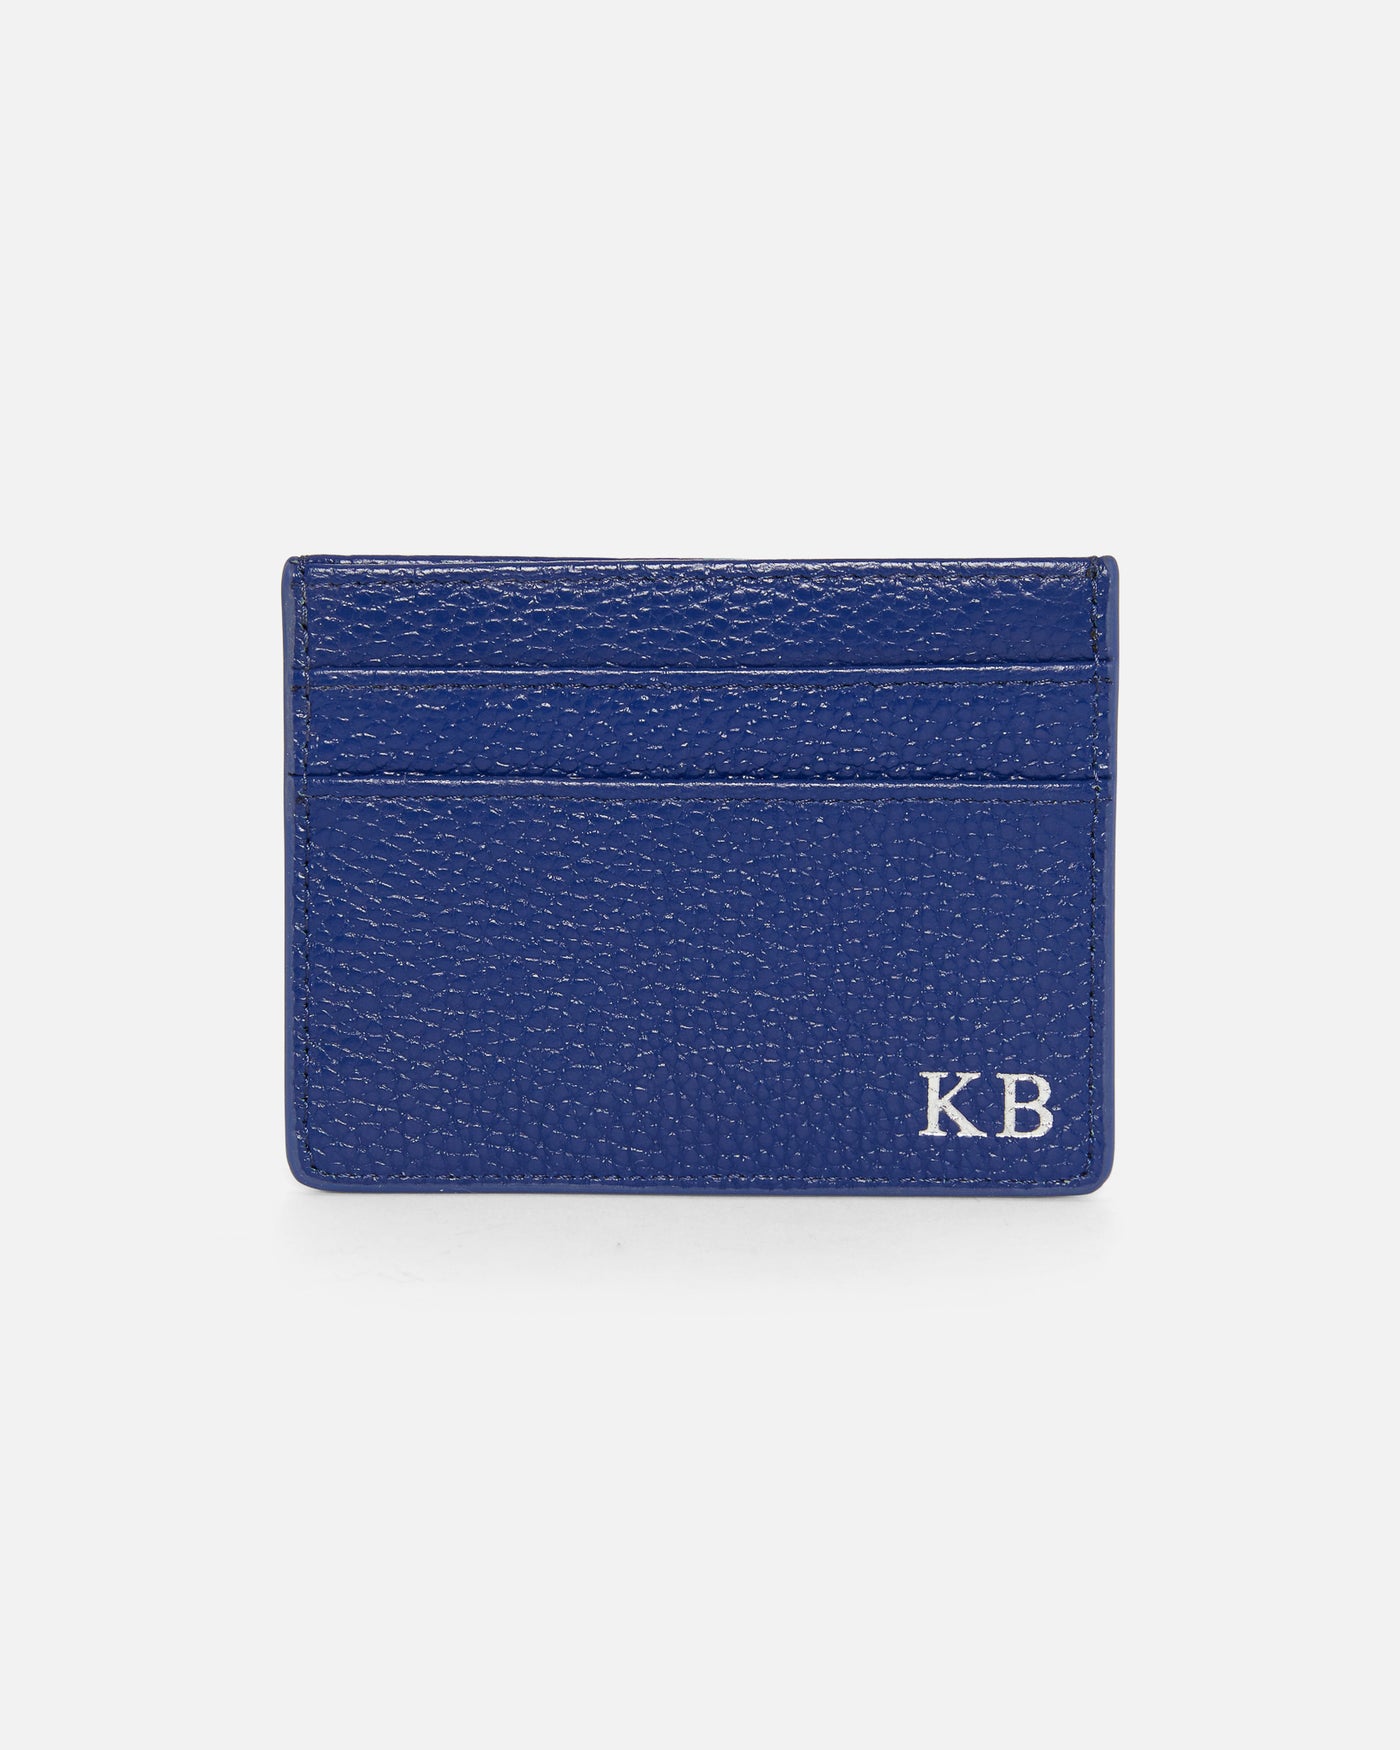 blue pebble leather card holder embossed with initials